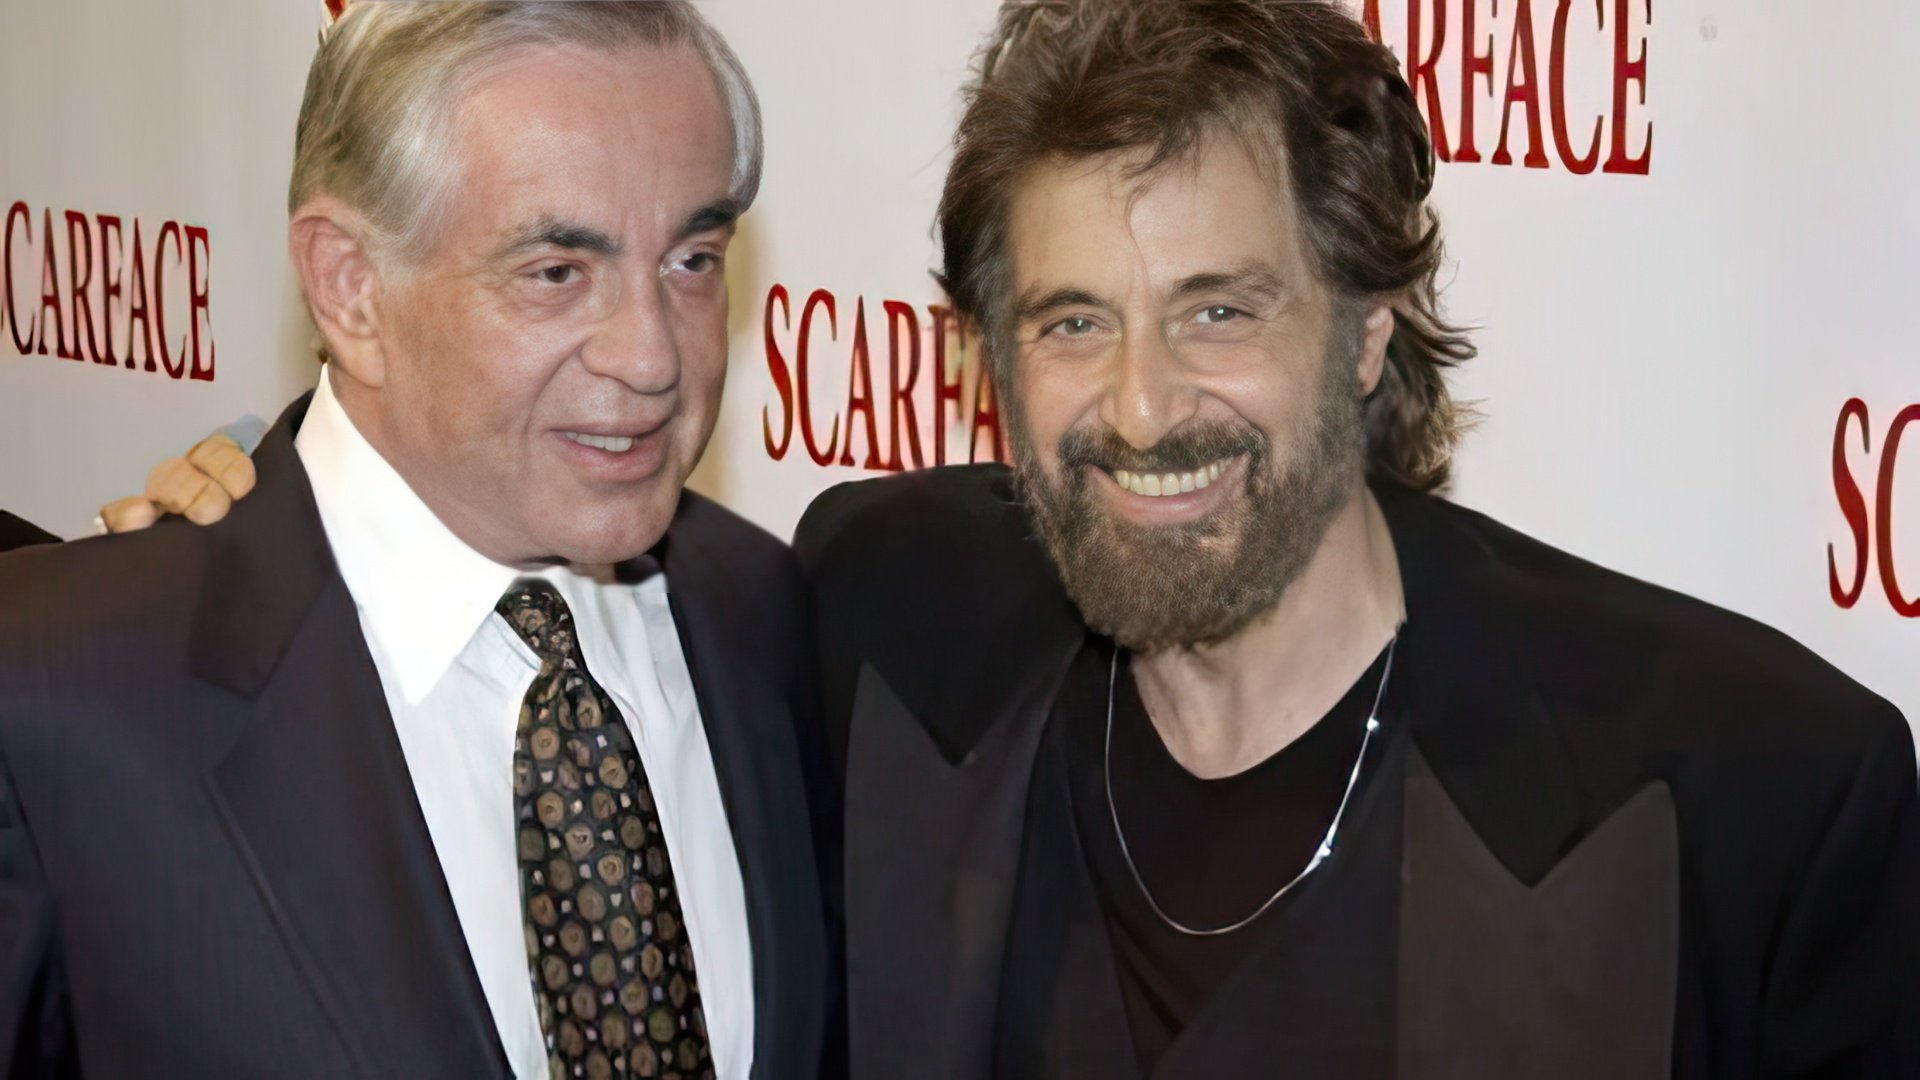 Al Pacino’s and Martin Bregman’s friendship lasted for many years